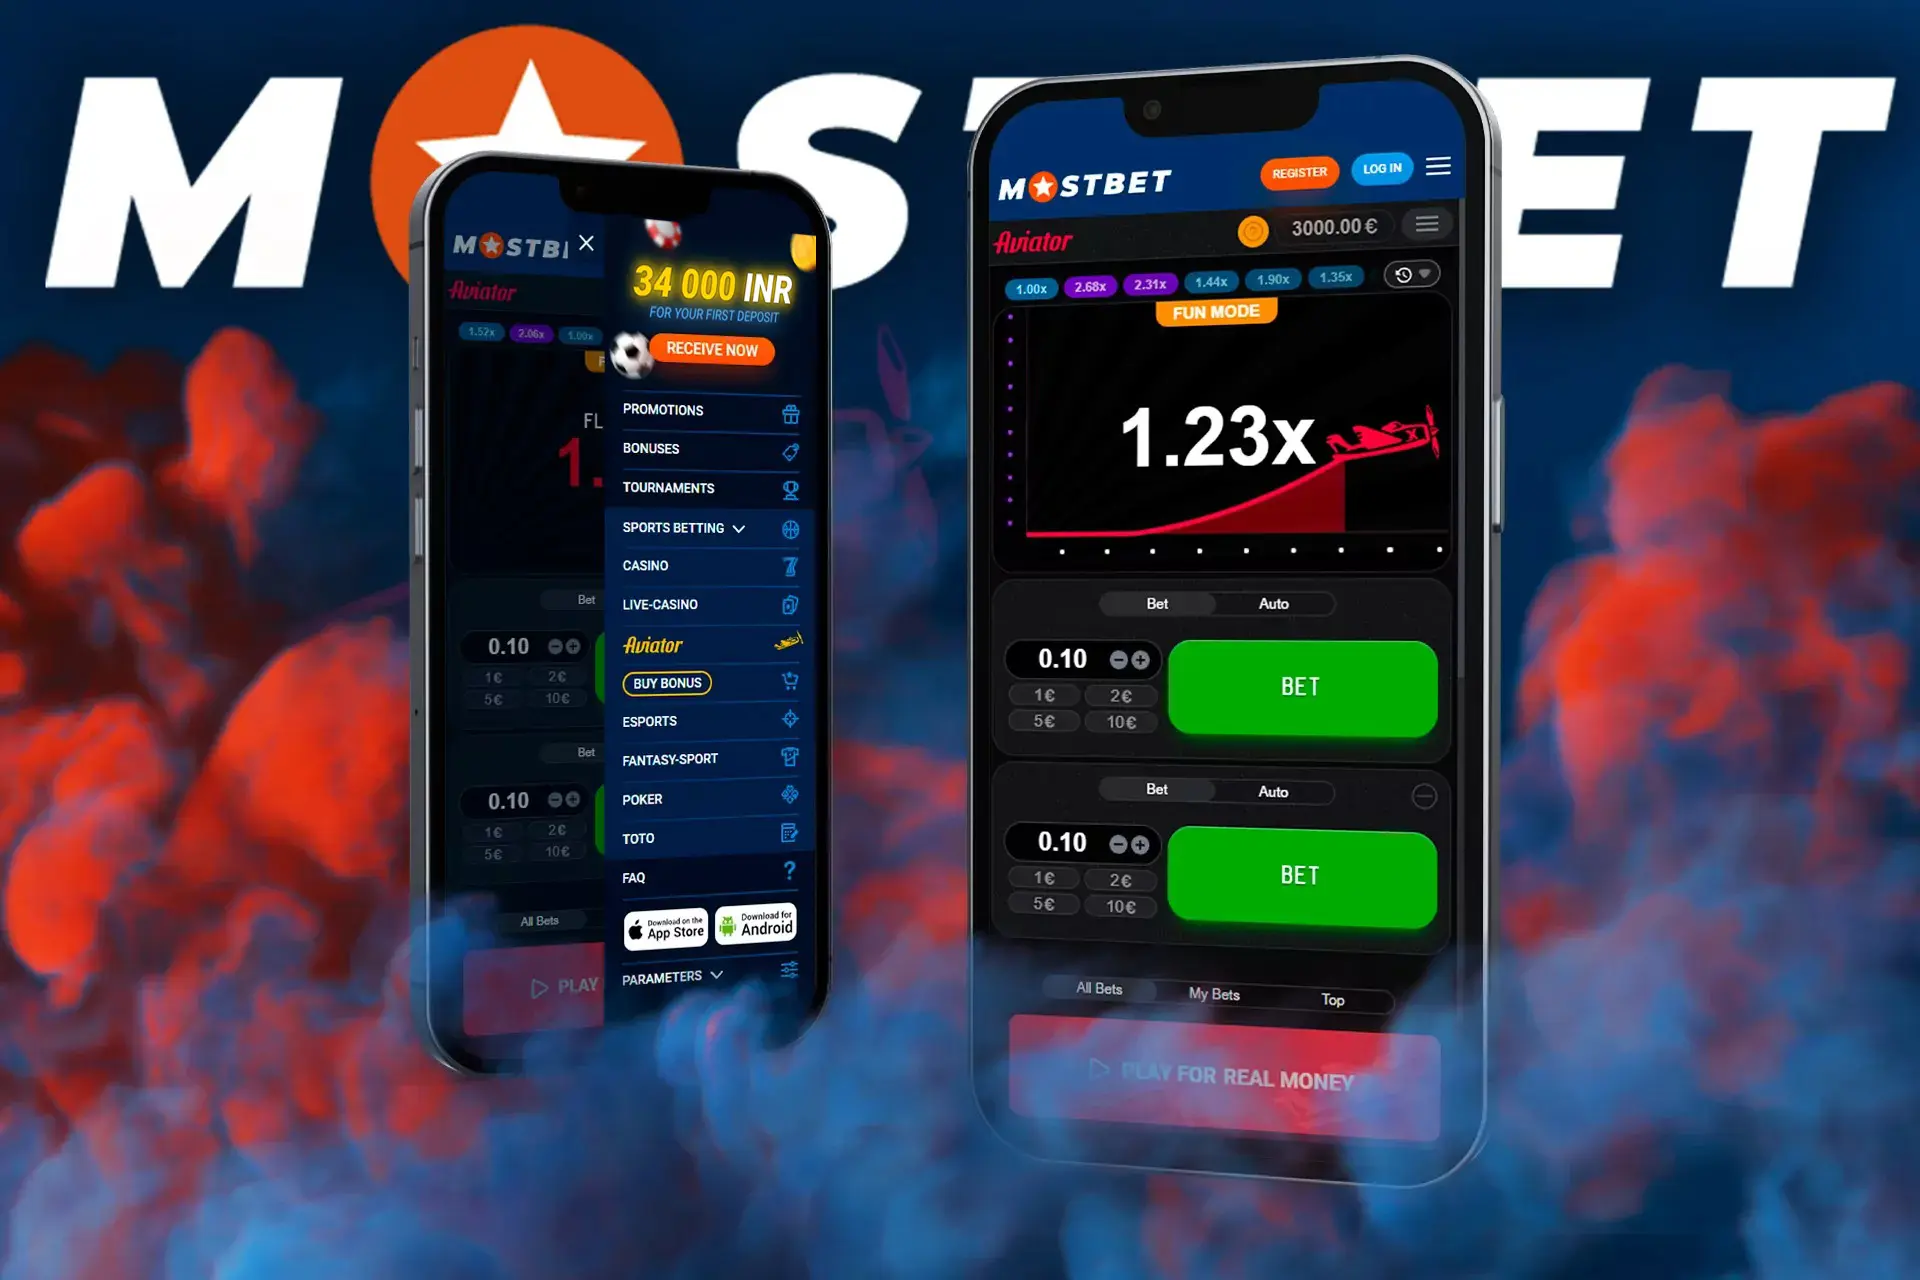 Mostbet presents a unique and enriched betting experience. With its easy access, wide range of sports markets, in-depth betting guide, and robust security measures, it stands as an ideal destination for sports betting enthusiasts. Not Resulting In Financial Prosperity